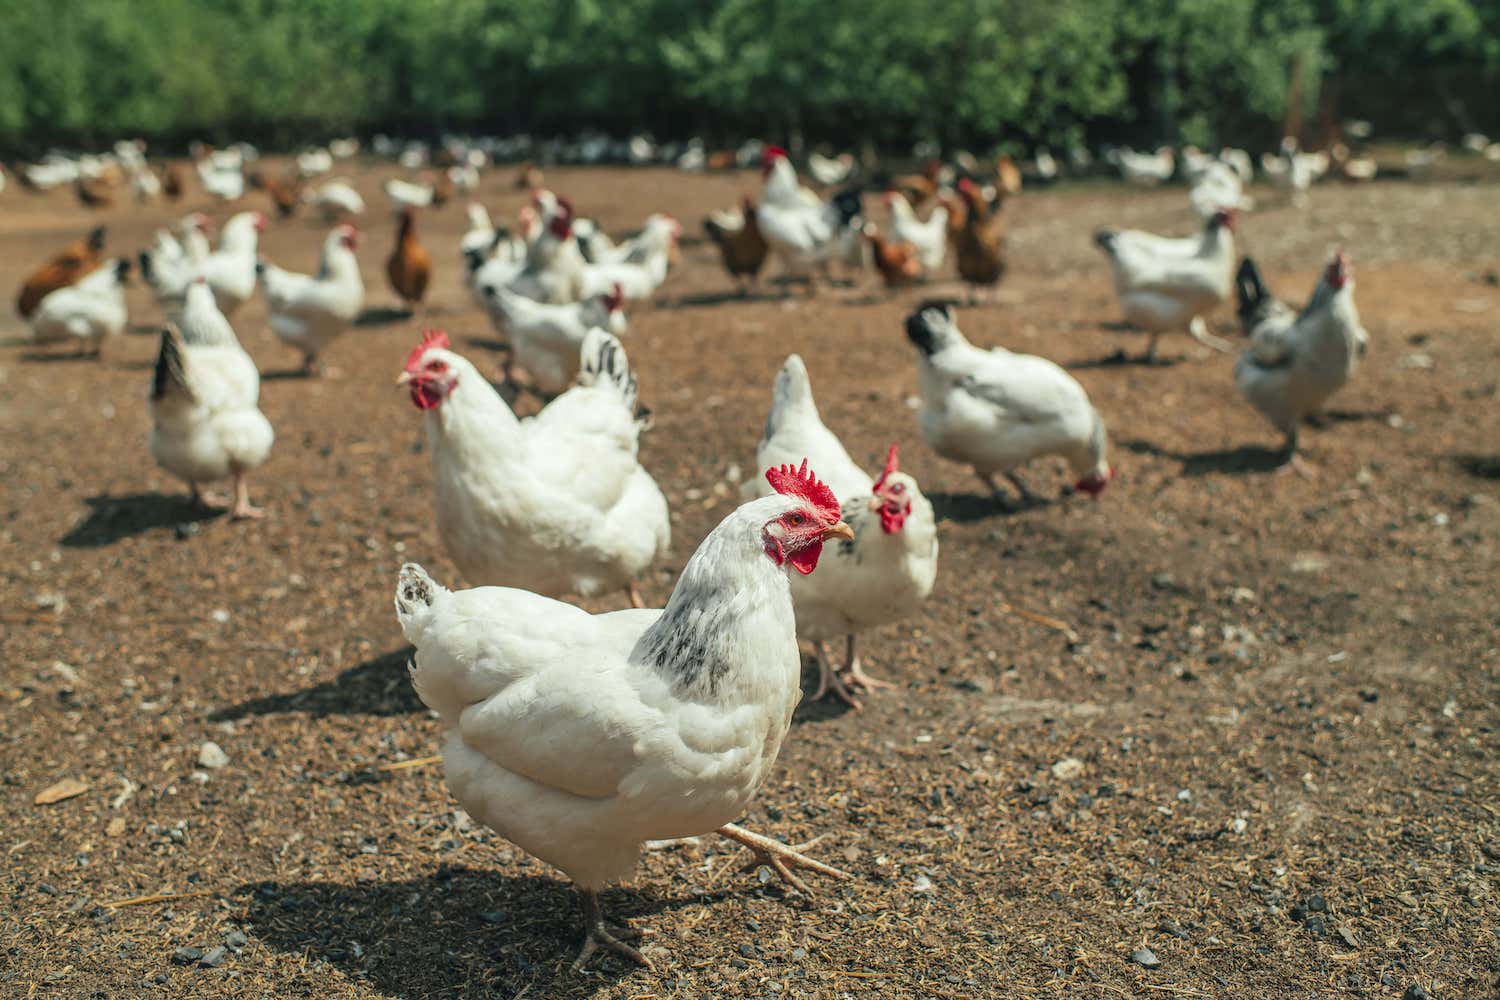 Lady living in Dubai resigns from her job, returns home to build poultry farm